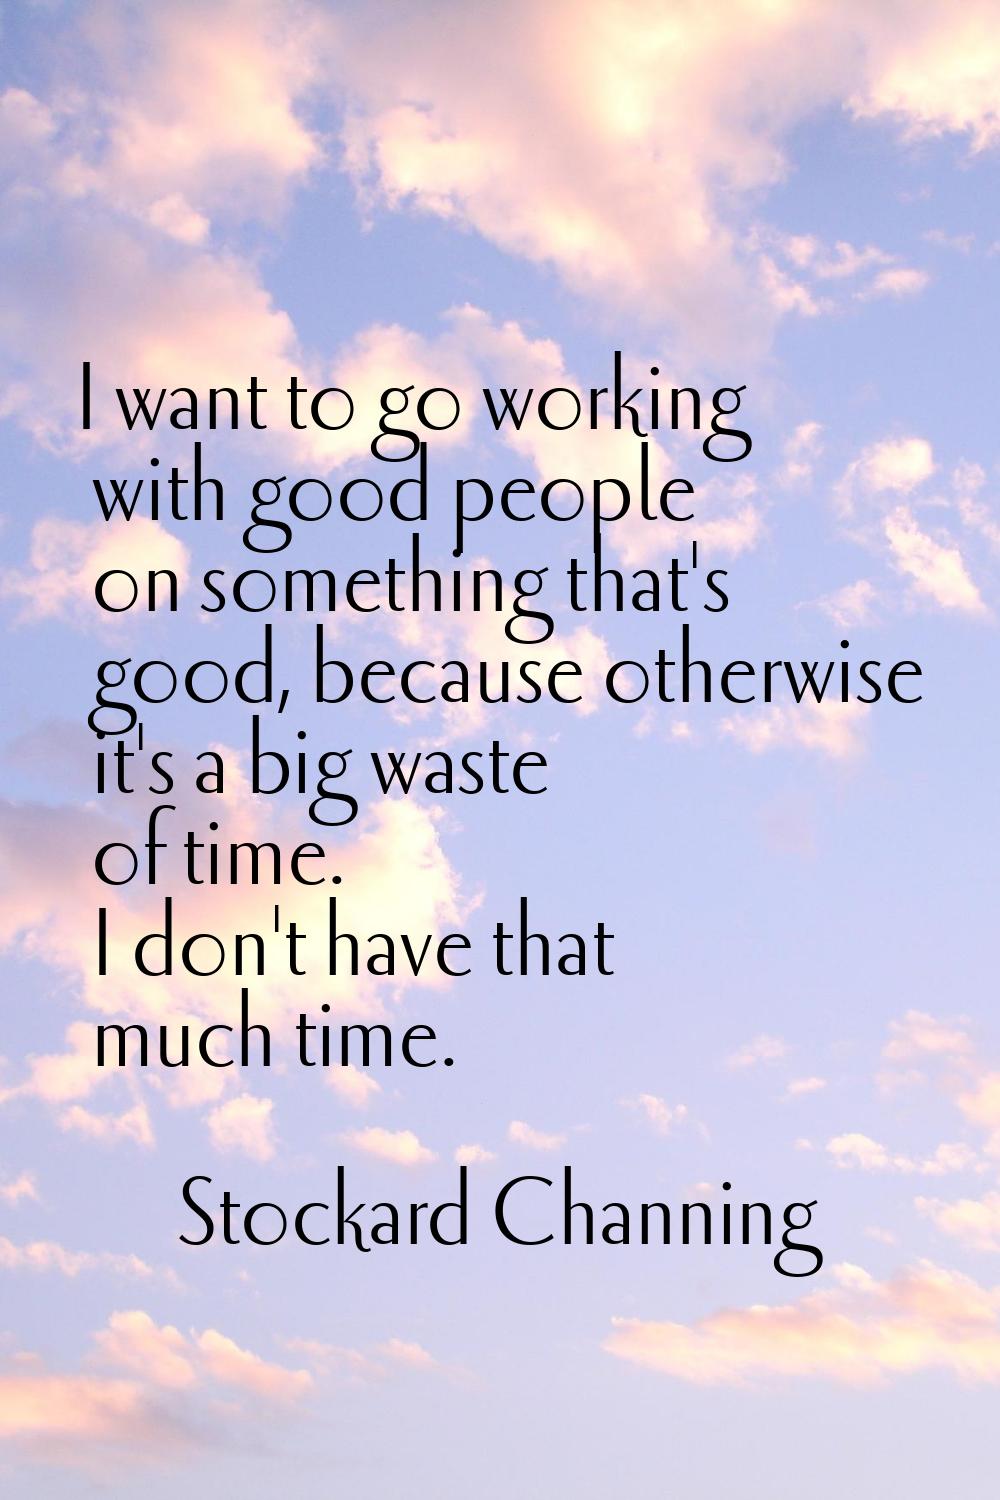 I want to go working with good people on something that's good, because otherwise it's a big waste 